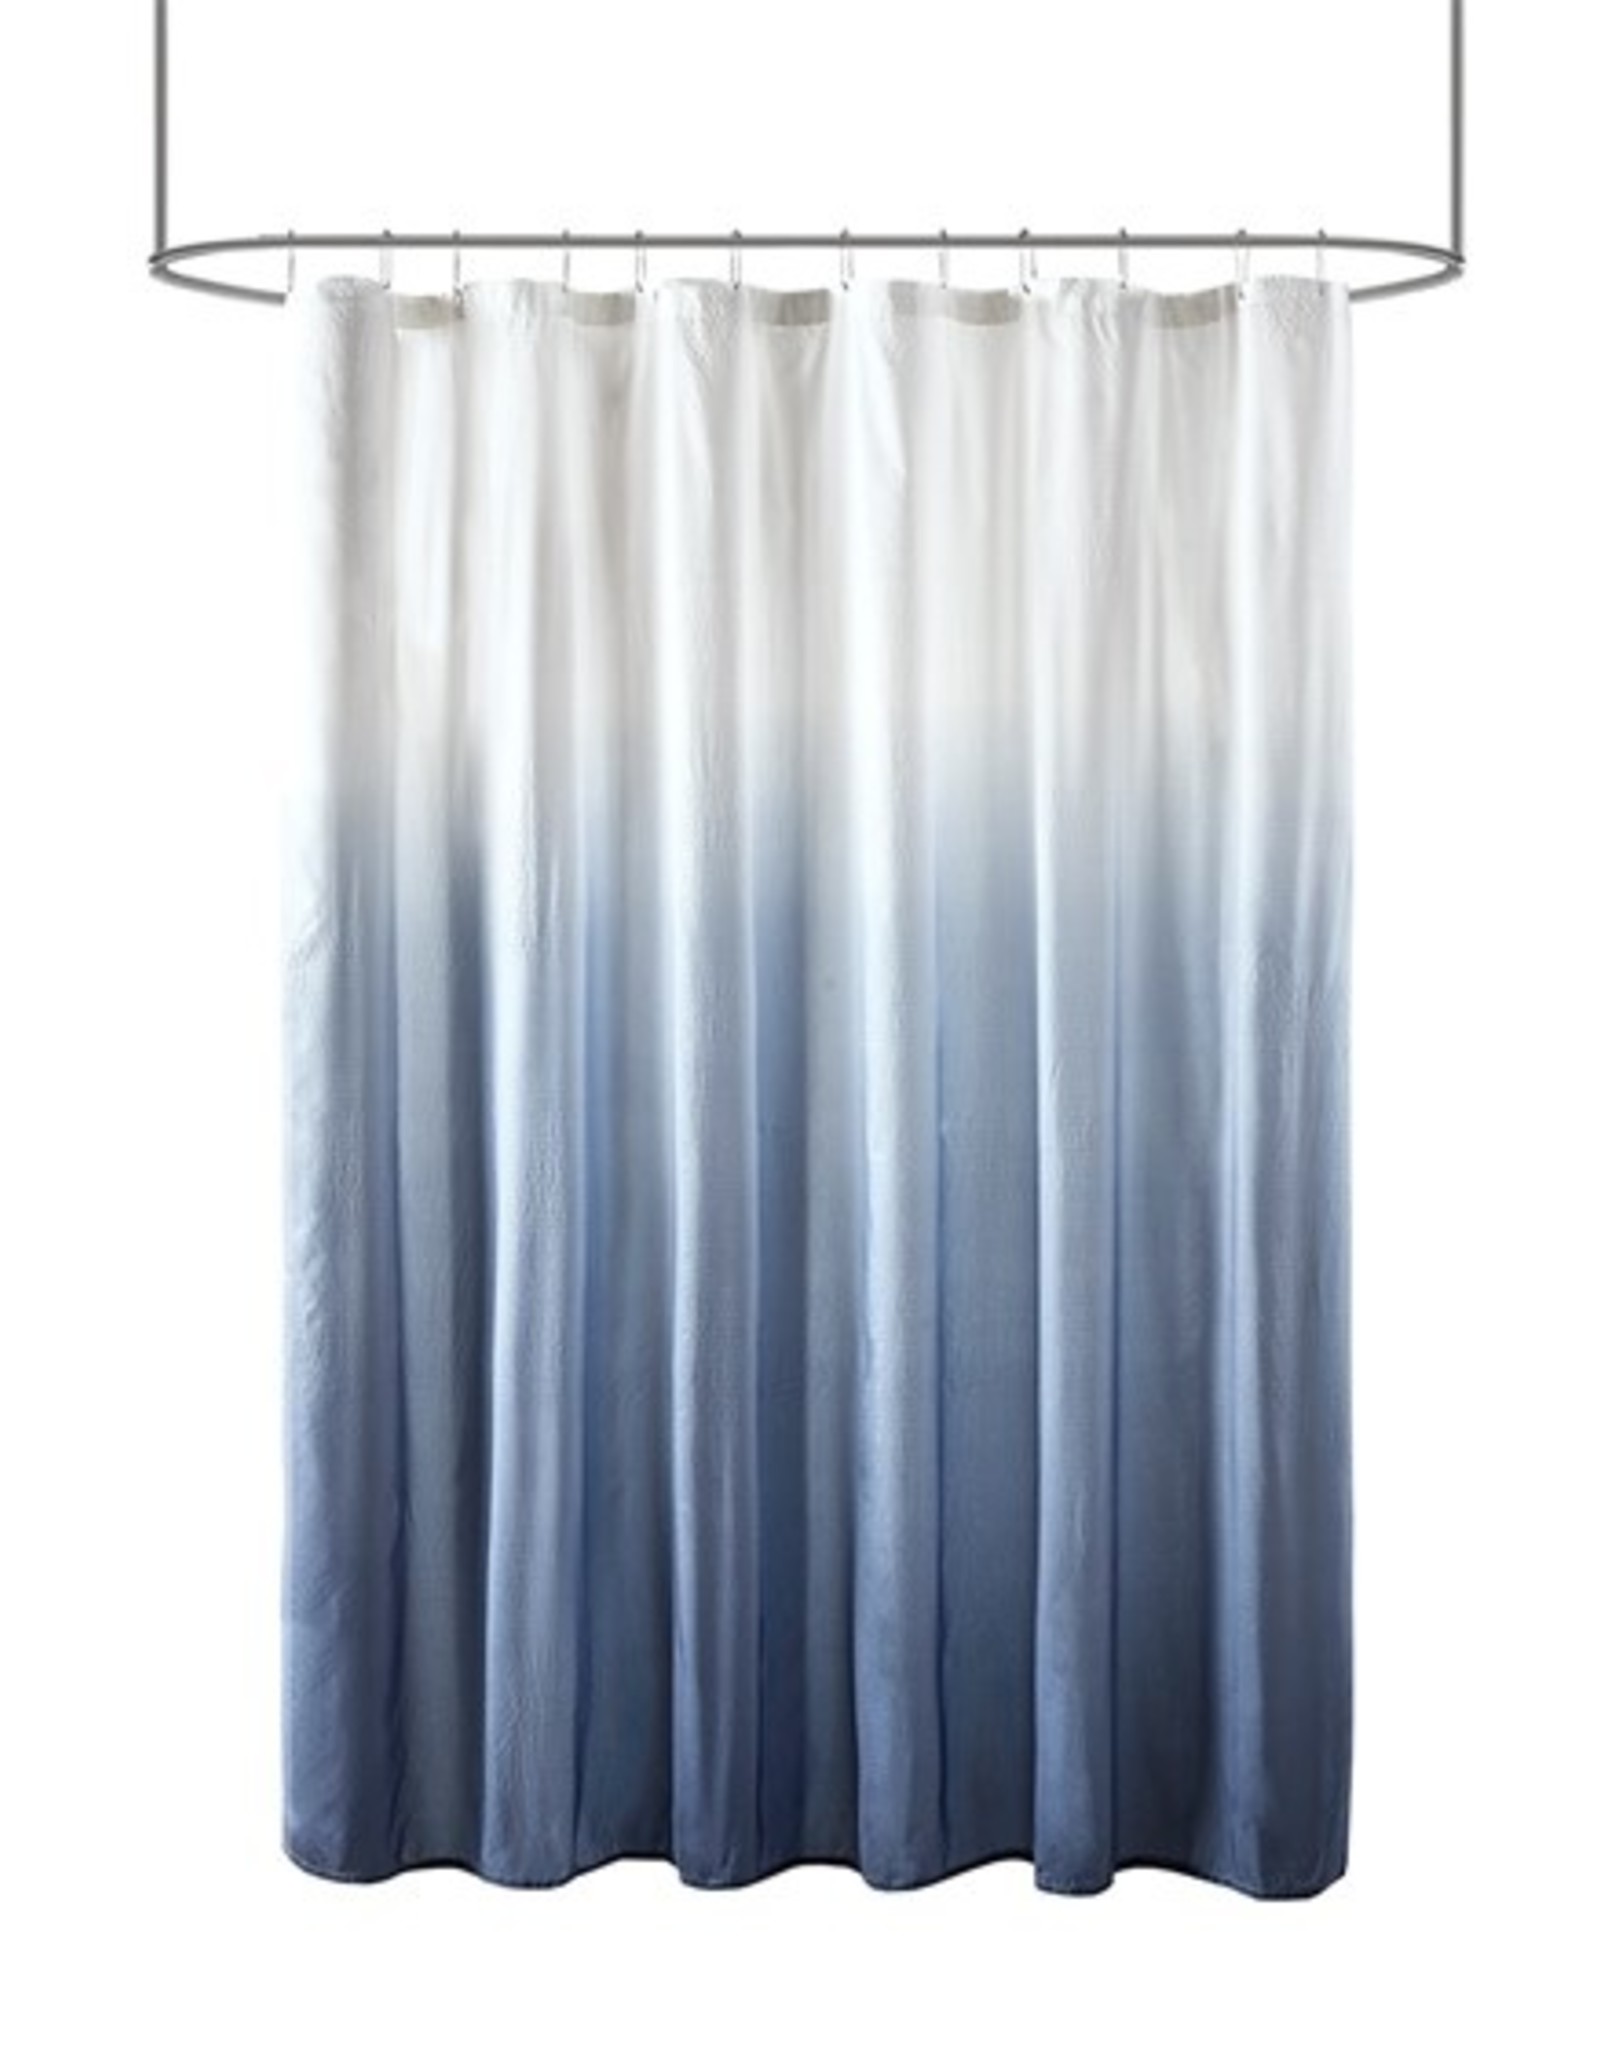 Shower Curtain Blue Ombre Awesome, Ombre Shower Curtain Blue